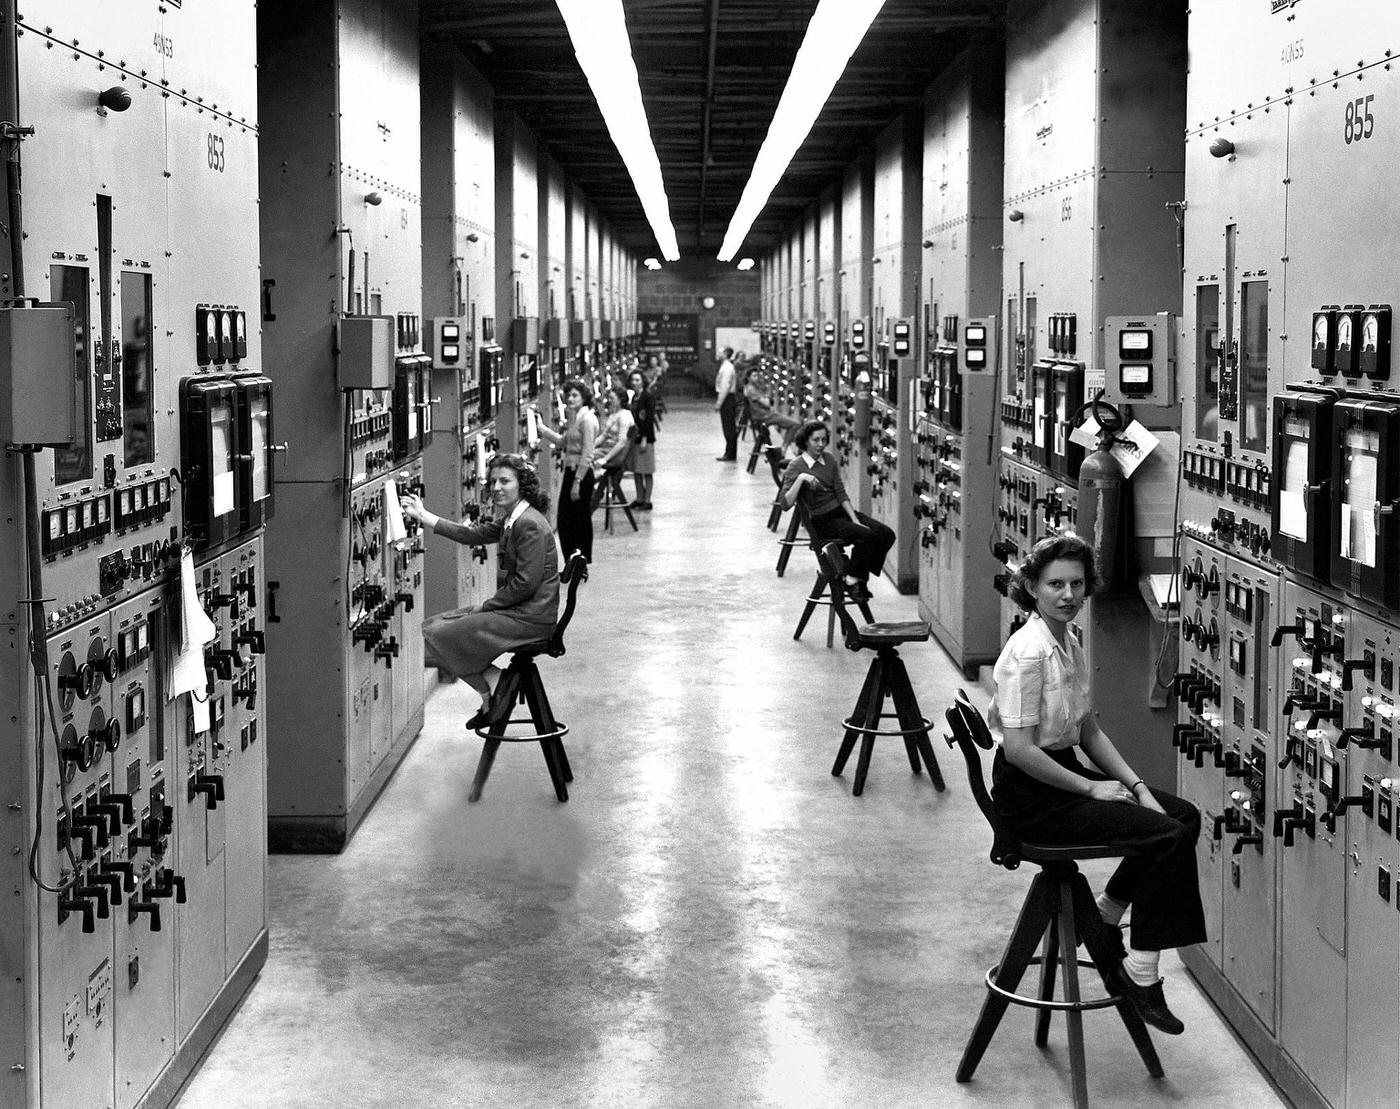 Calutron Operators at Y-12 Plant, Oak Ridge. 1944. The calutrons refined uranium ore. Secrecy shrouded workers' efforts. Tennessee.